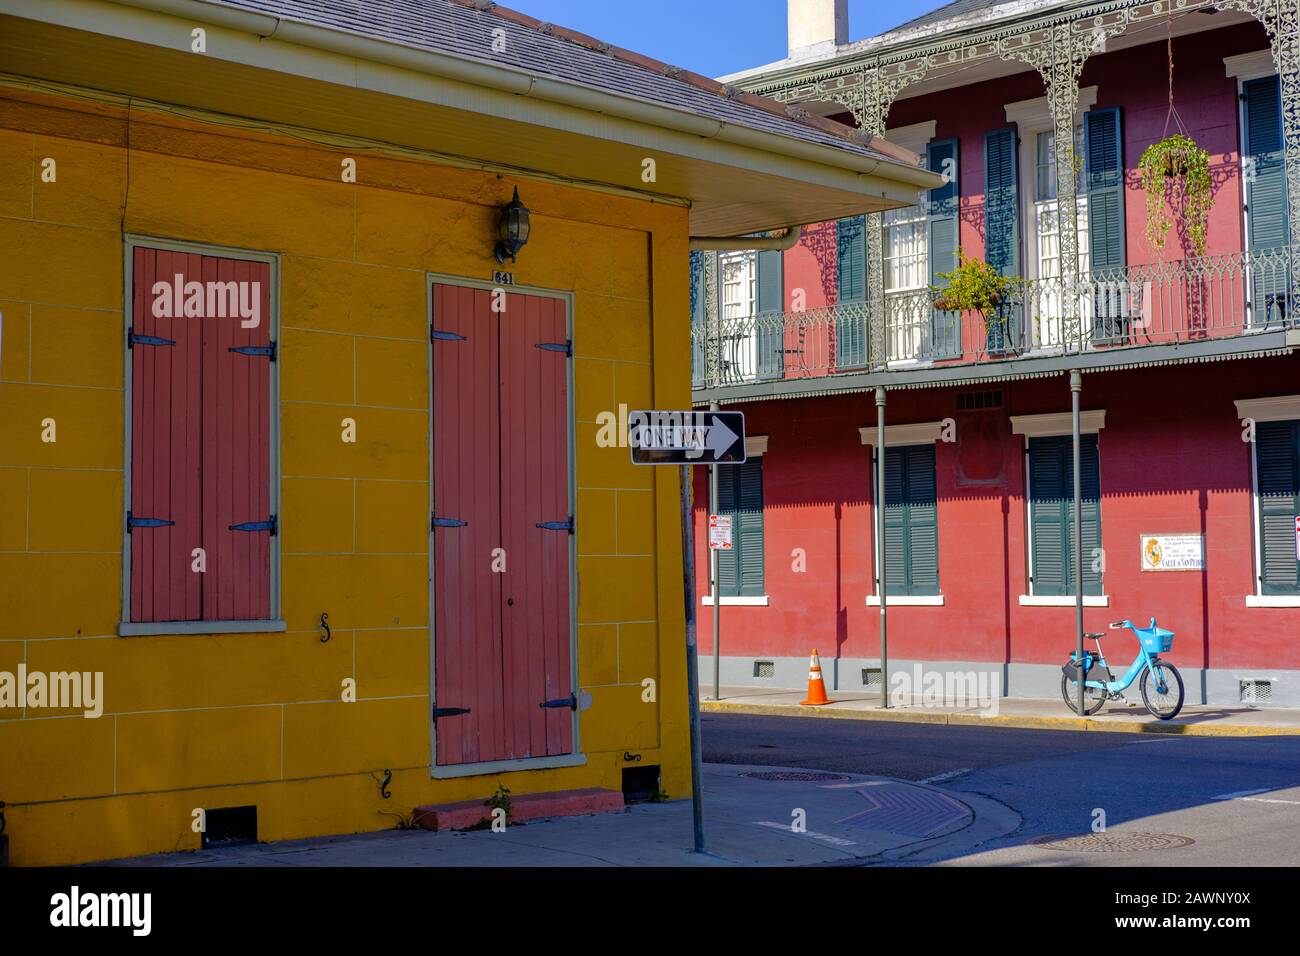 Inn in St Peter, angolo tra St Peter St e Burgundy St, colorate case coloniali, New Orleans French Quarter New Orleans, Louisiana, USA Foto Stock